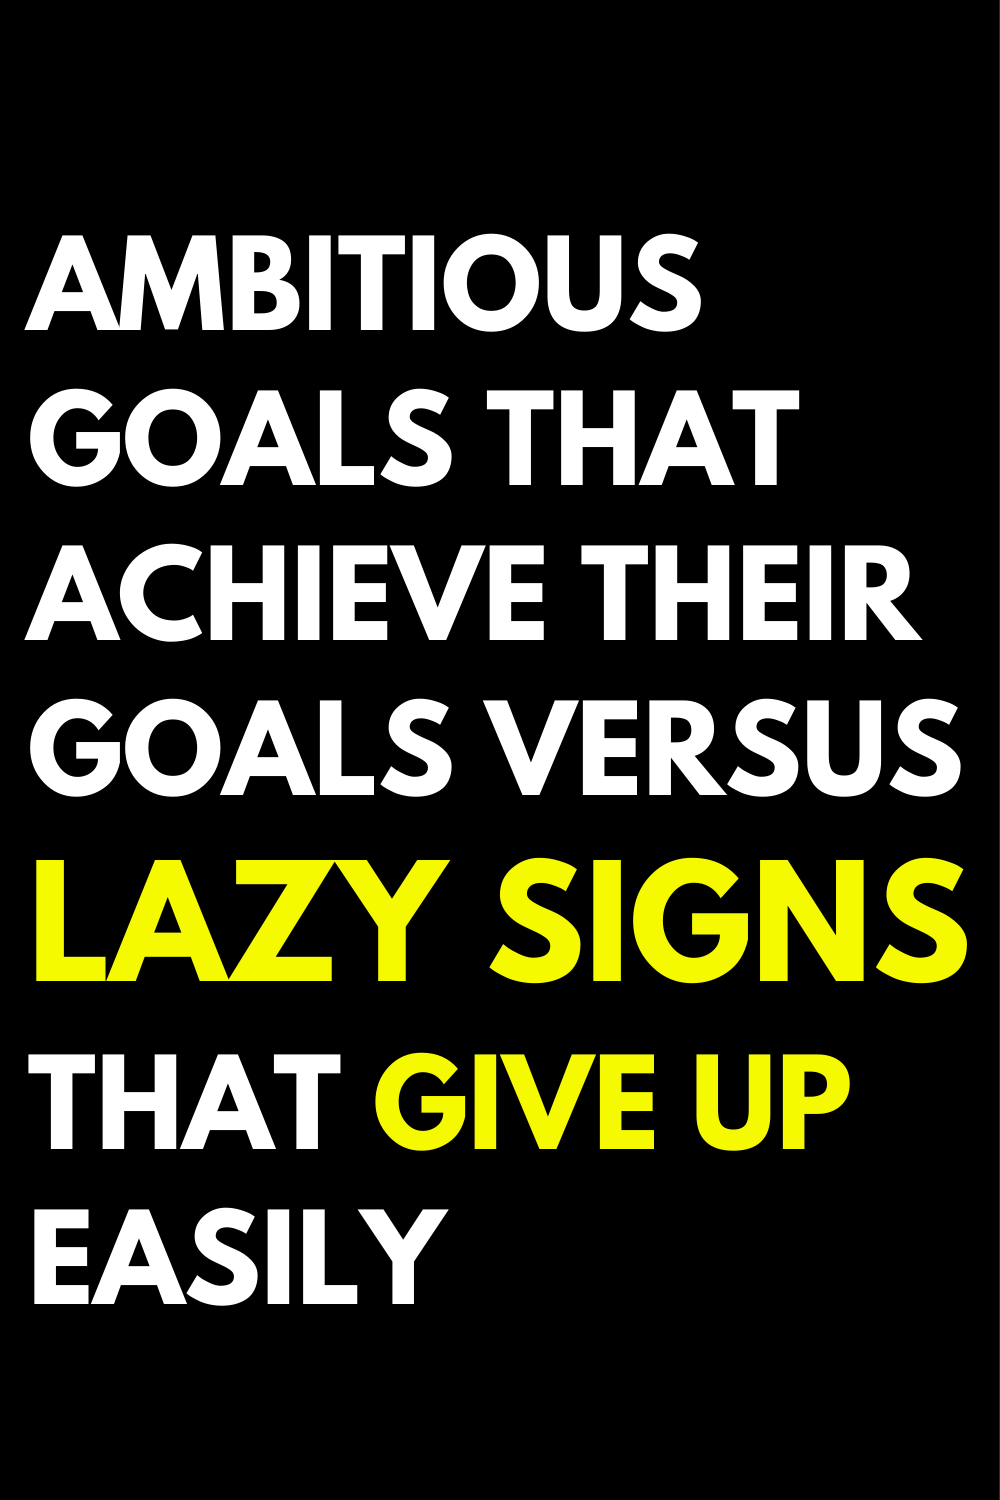 Ambitious goals that achieve their goals versus lazy signs that give up easily